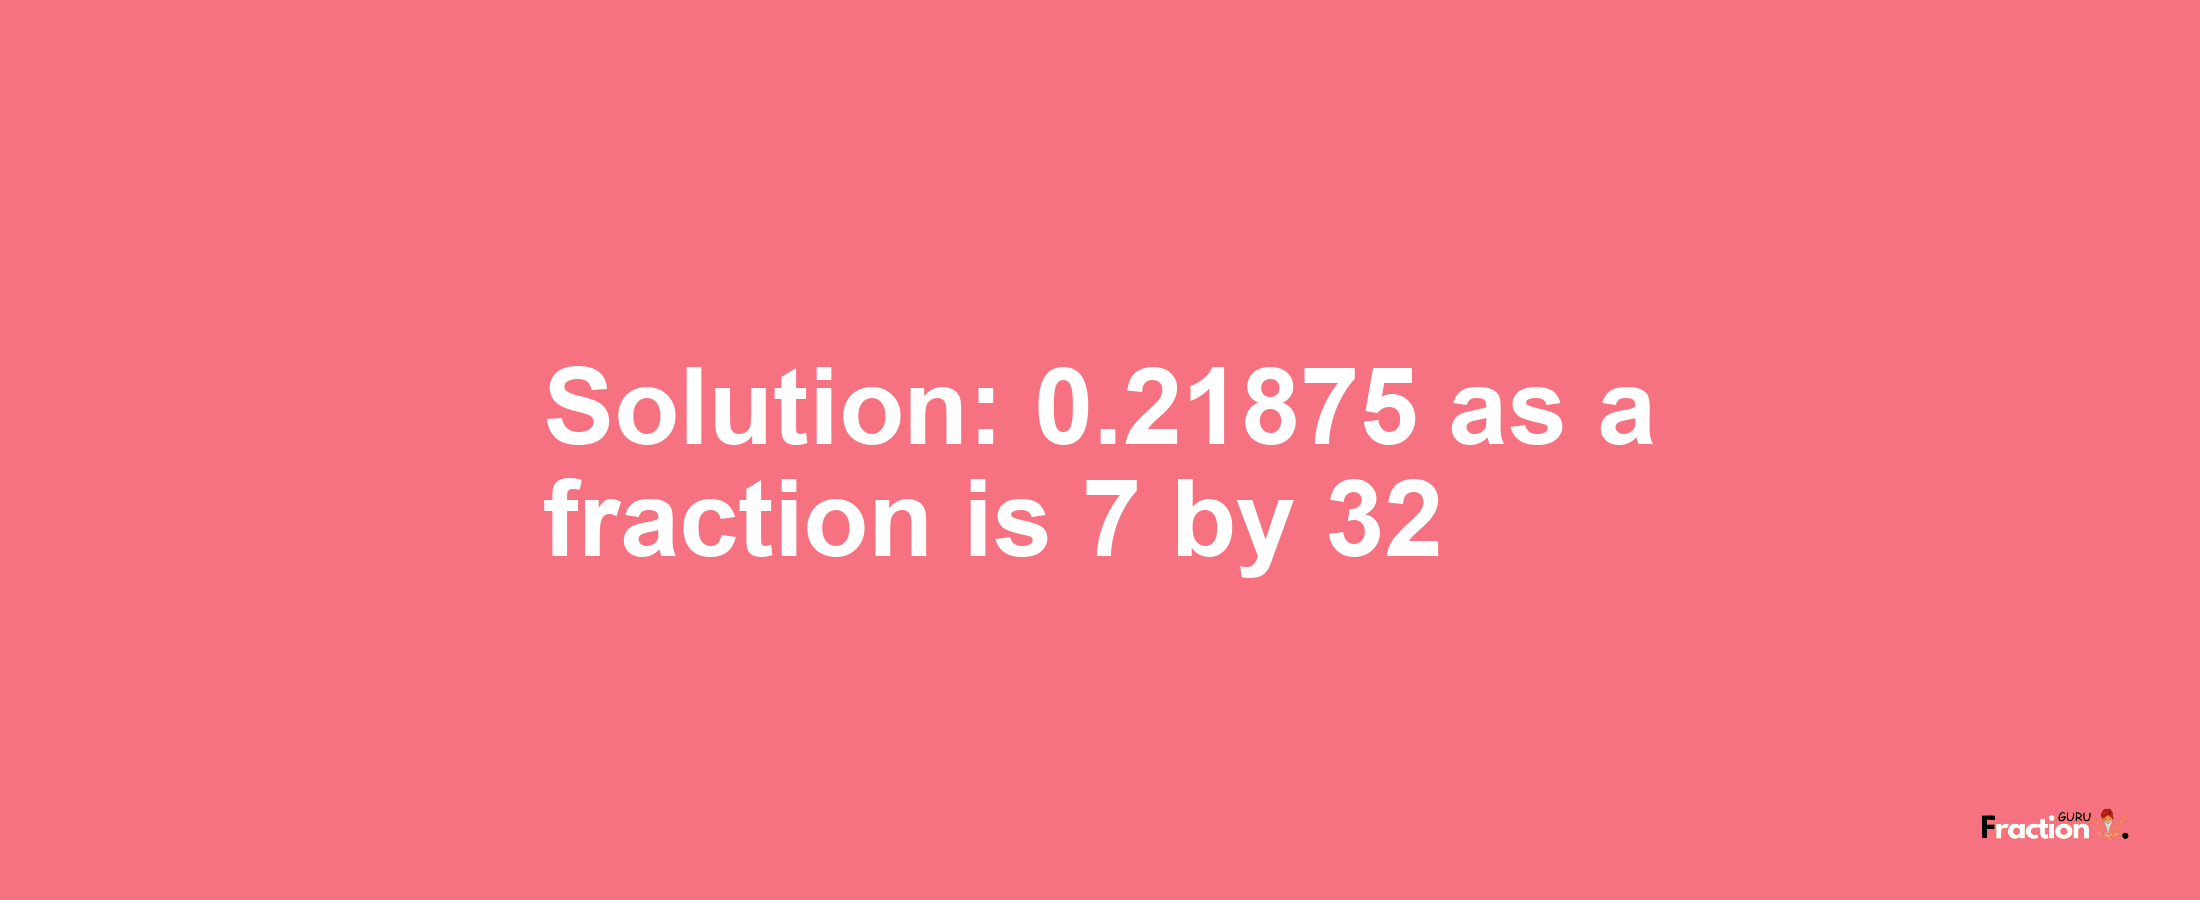 Solution:0.21875 as a fraction is 7/32